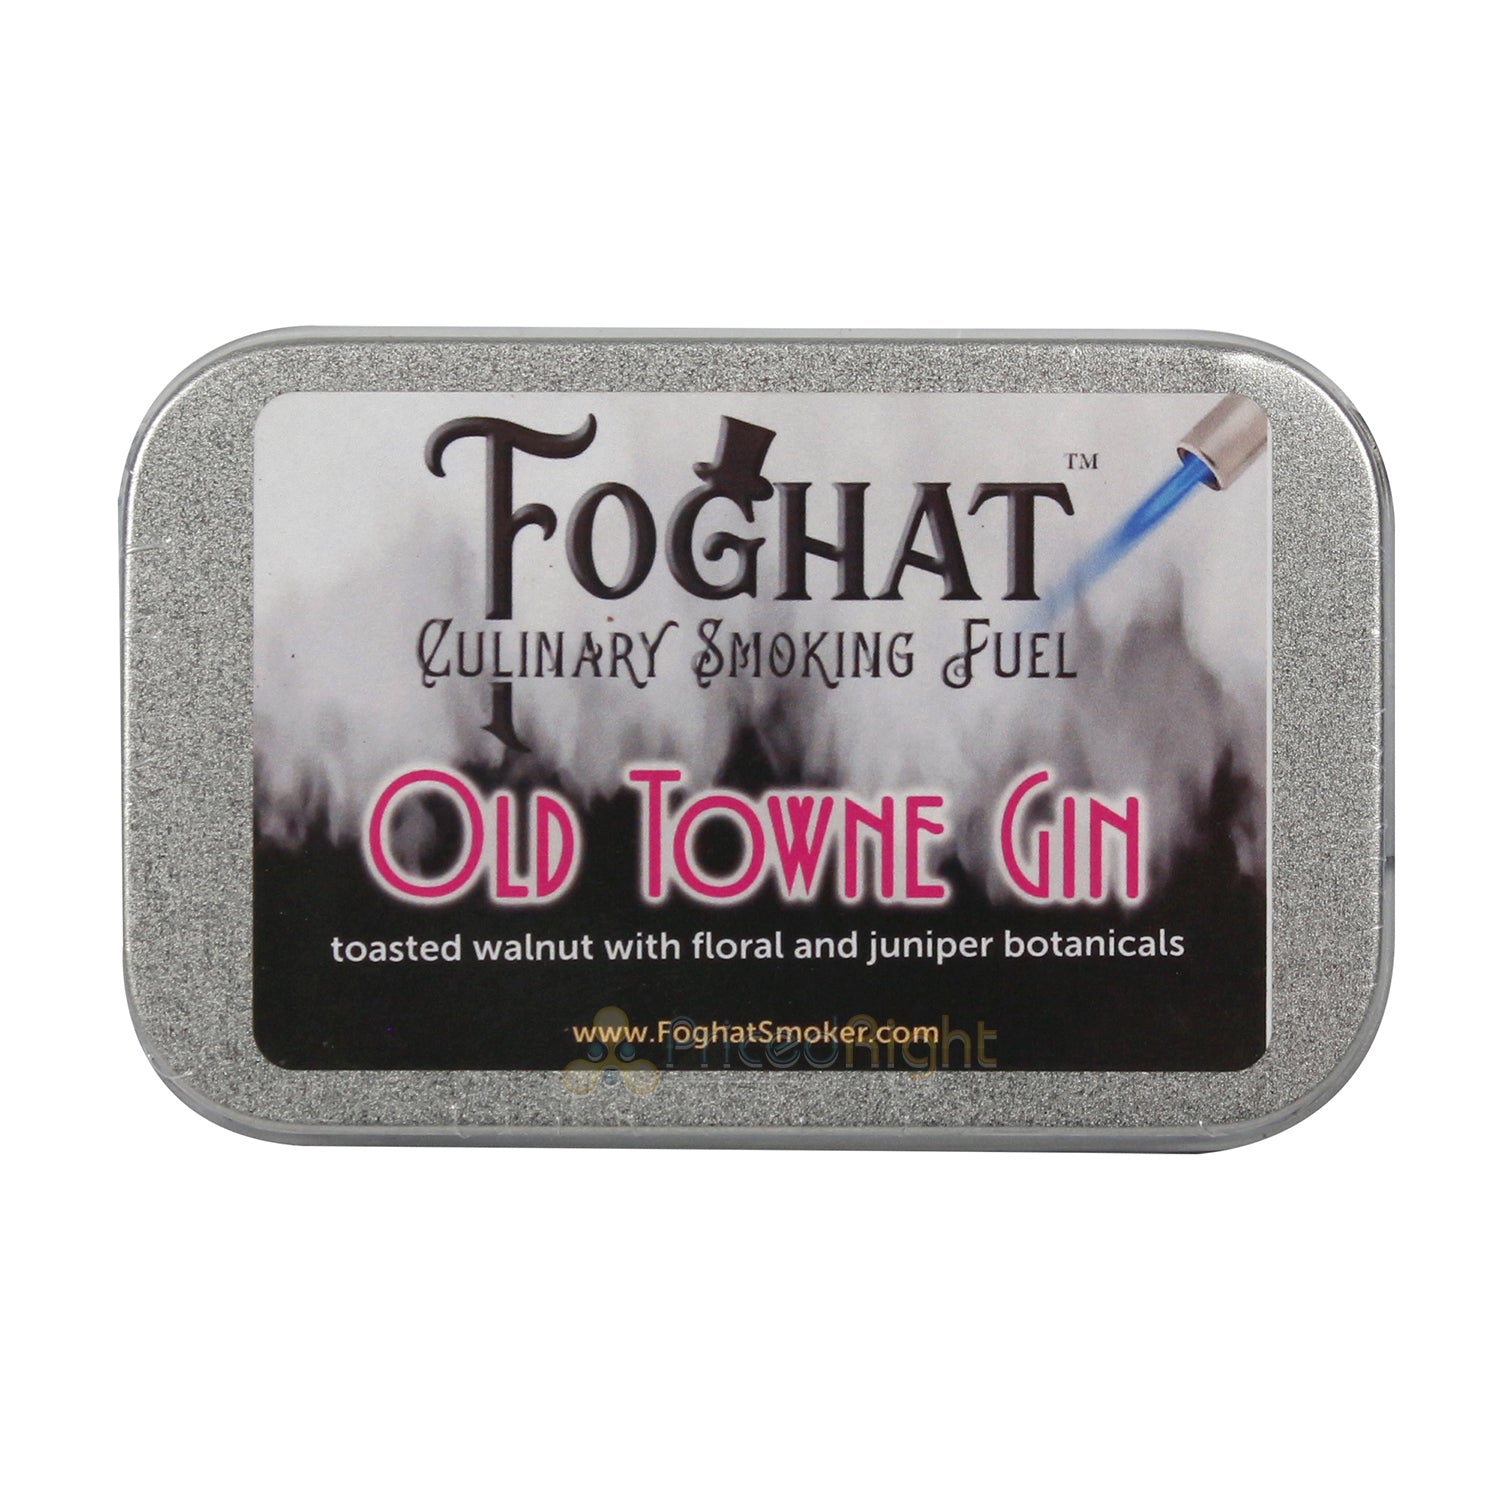 Foghat Culinary Smoking Fuel Old Towne Gin With Juniper All-Natural 4 Ounce